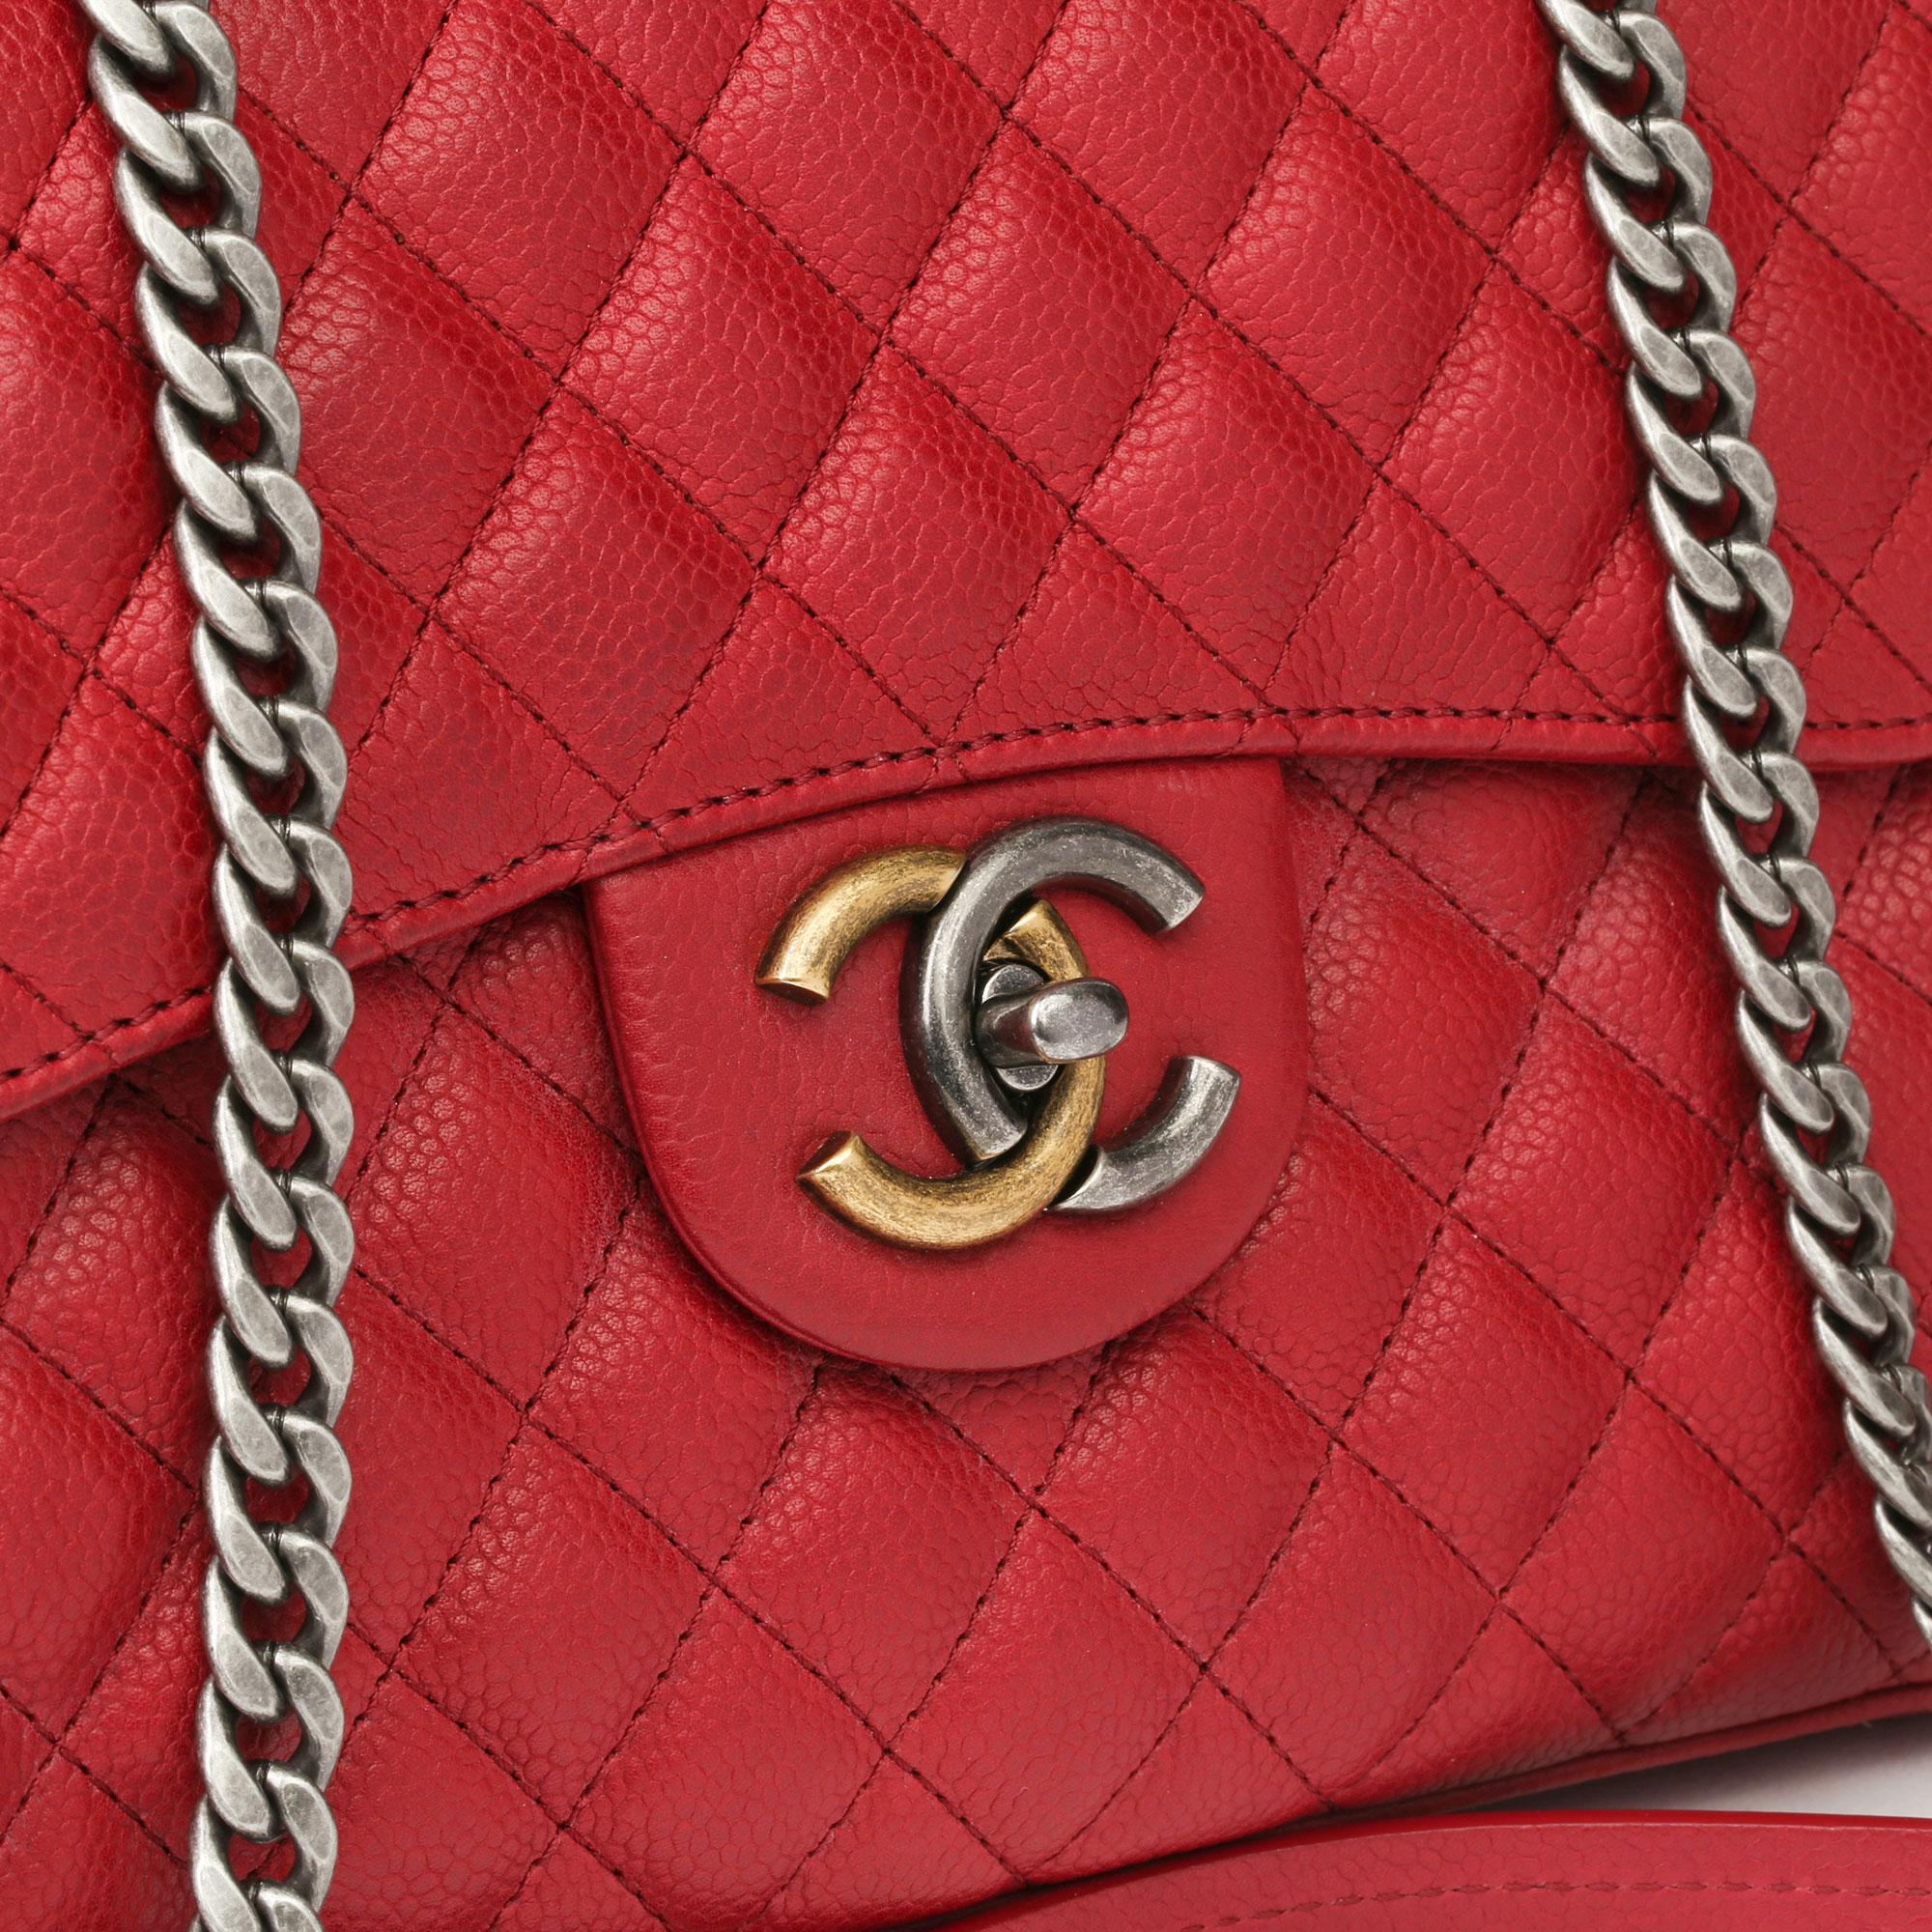 Women's 2017 Chanel Burgundy Quilted Caviar Leather Timeless Shoulder Tote 